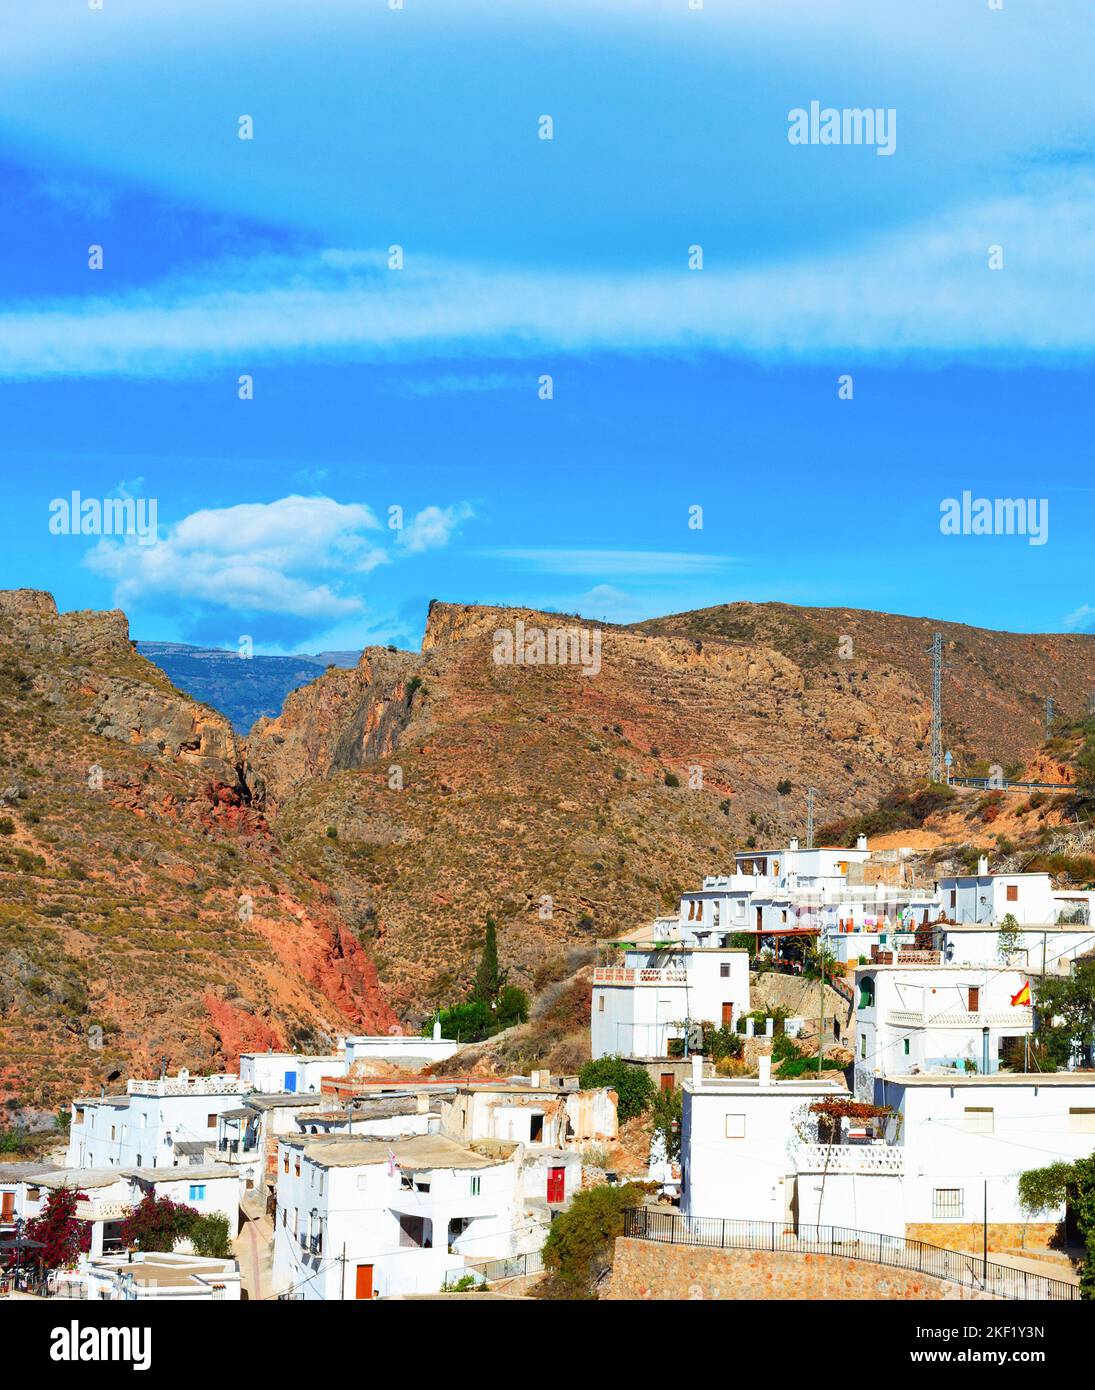 Cartagena architecture on mountain hill view, Darrical, Spain Stock Photo